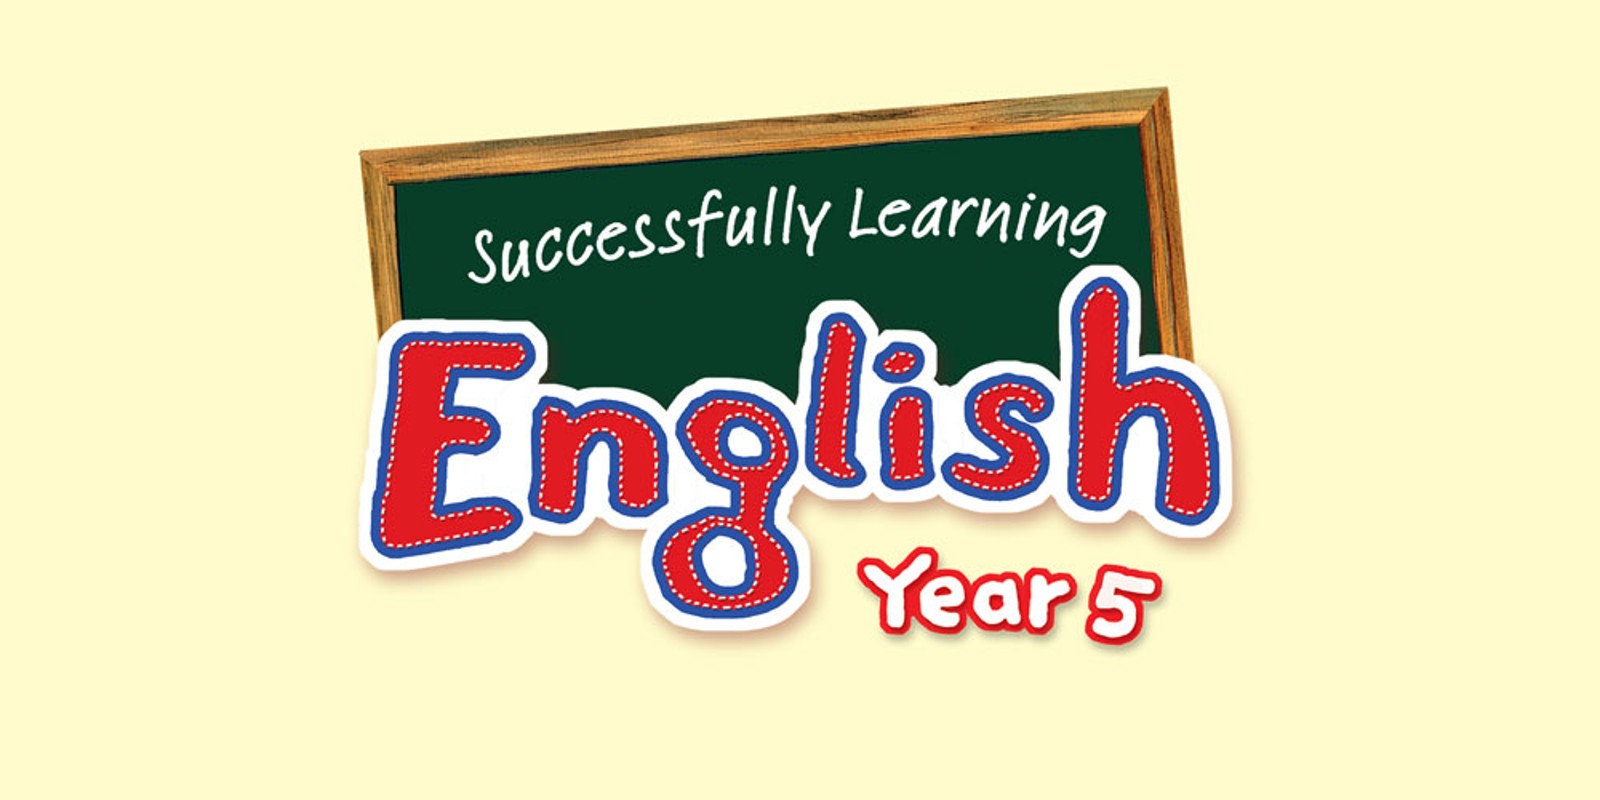 Successfully Learning English Year 5